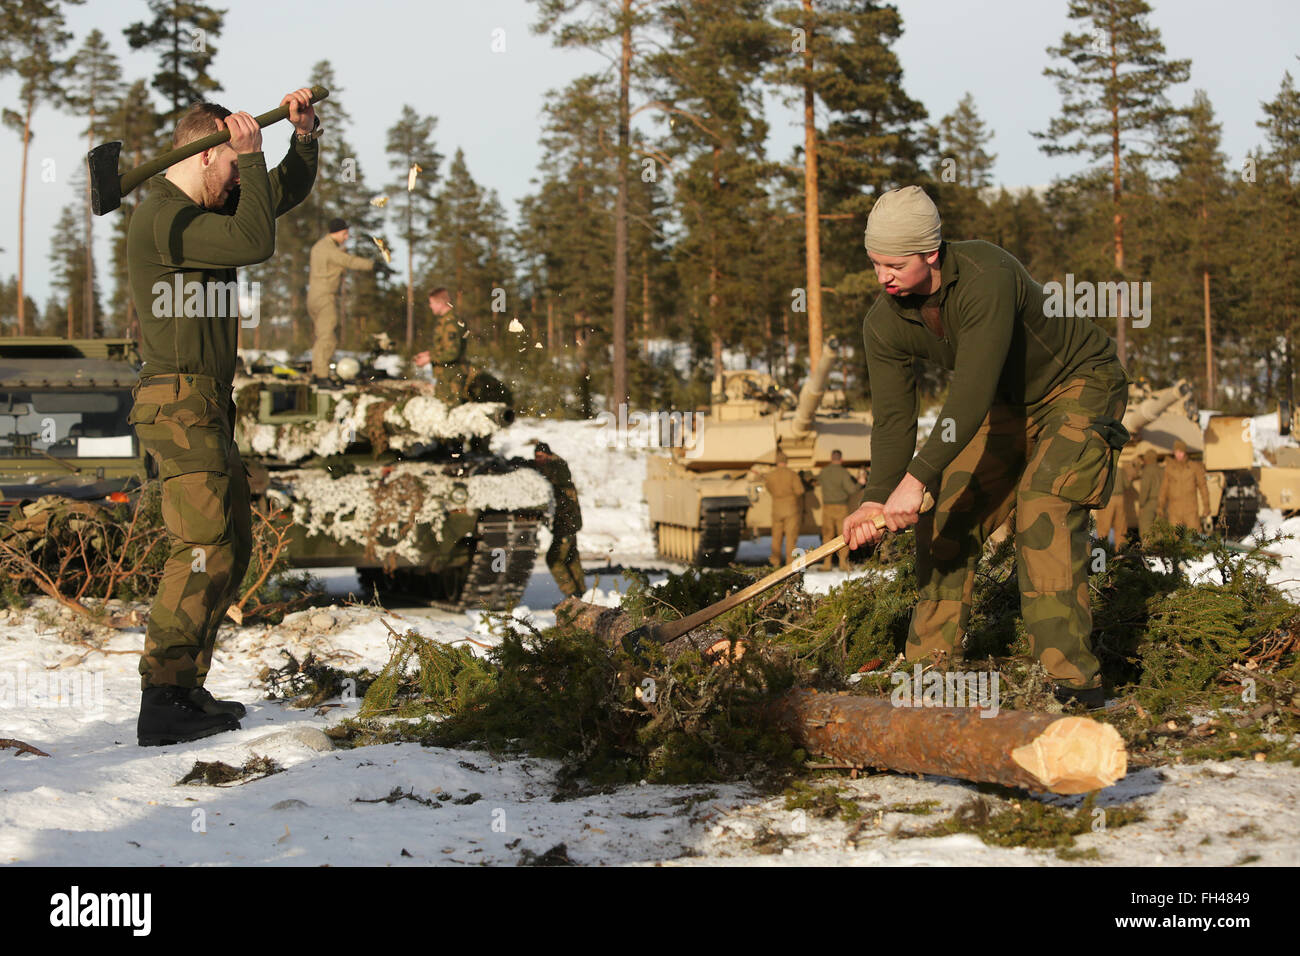 Members of the Norwegian Army's Telemark Battalion chop wood for a campfire during training in Rena, Norway, Feb. 18, 2016. The Marines and Norwegian Army are working together as part of Exercise Cold Response, a joint NATO and allied country exercise comprised of 12 countries and approximately 16,000 troops. The Combined Arms Company is comprised of multiple vehicles with multiple capabilities, including amphibious assault vehicles, M1A1 Abrams Main Battle Tanks and light armored vehicles.  Stock Photo